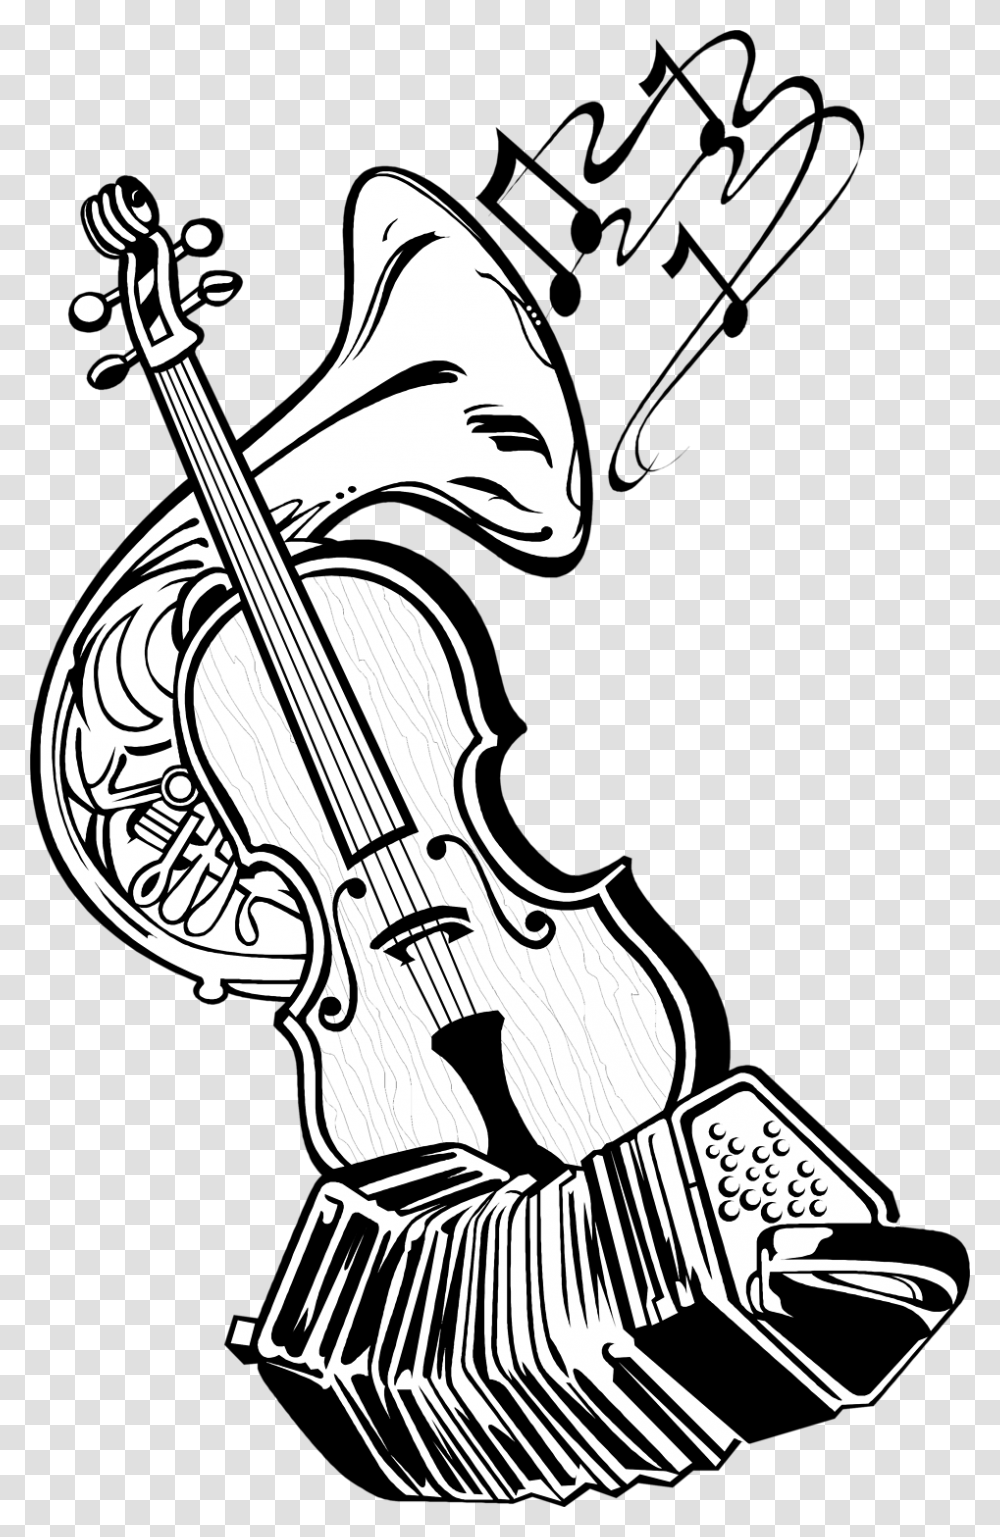 Instruments Music Free Stock Photo Illustration Of Musical, Leisure Activities, Musical Instrument, Violin, Viola Transparent Png